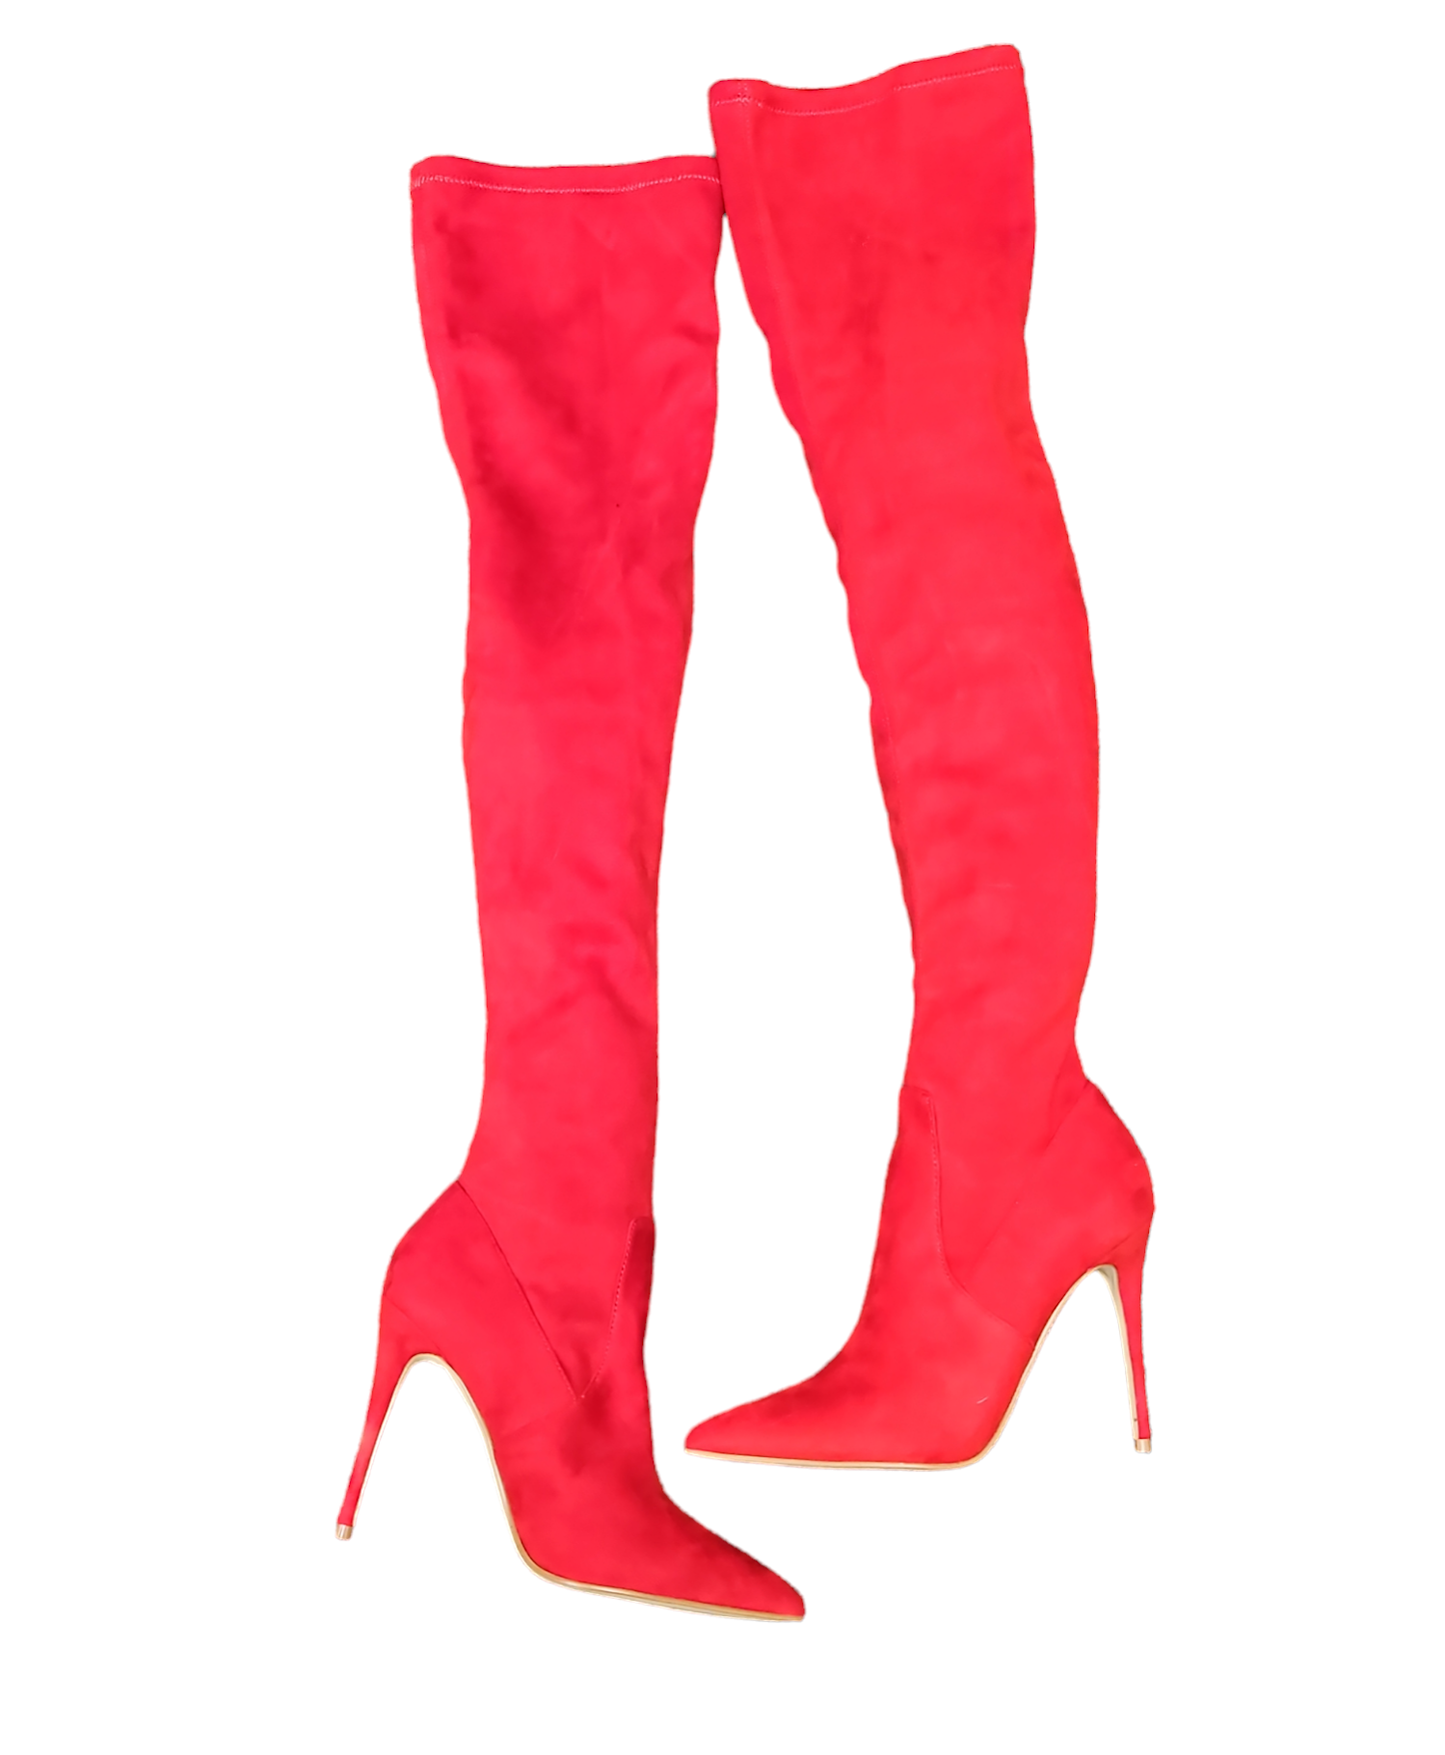 Steve Madden Dominique Red Thigh Stretch Boots Sz 9